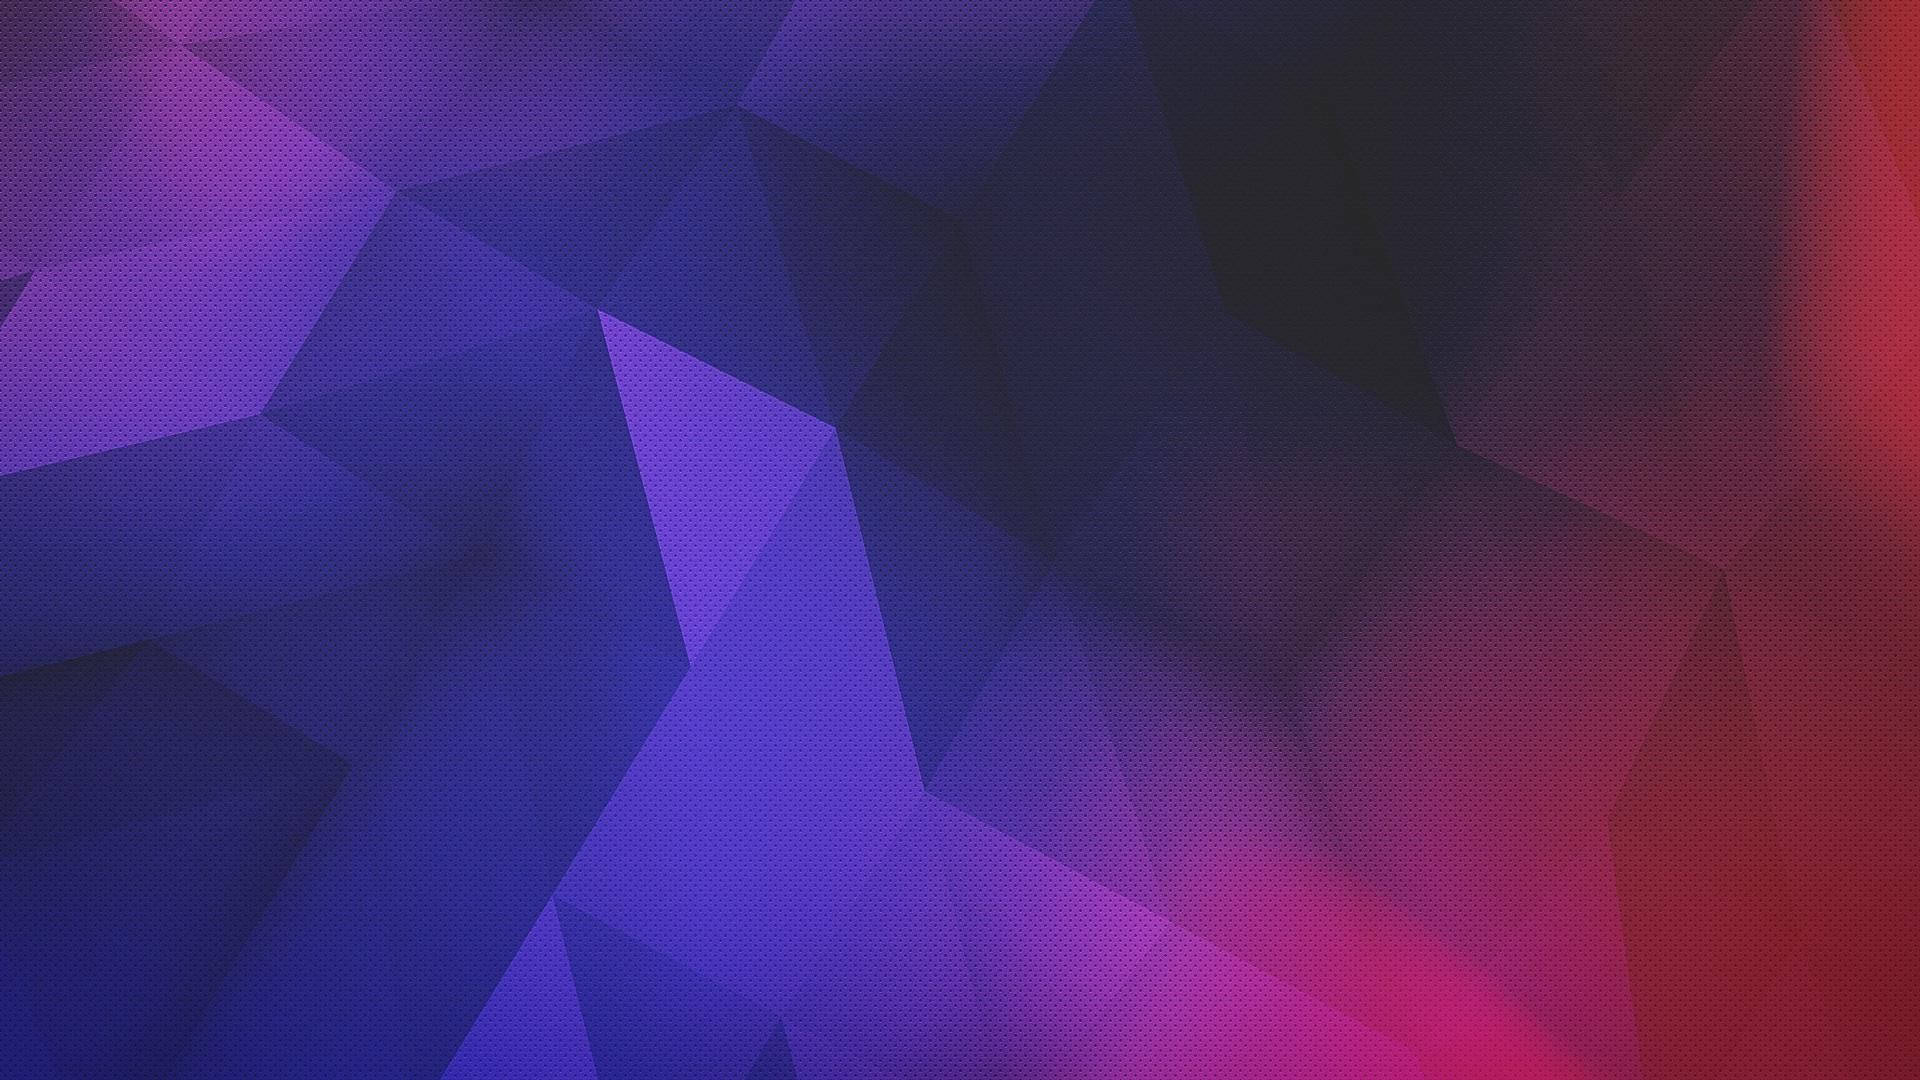 Add A Splash Of Colour With This Dazzling Abstract Purple Ombre Polygon Background